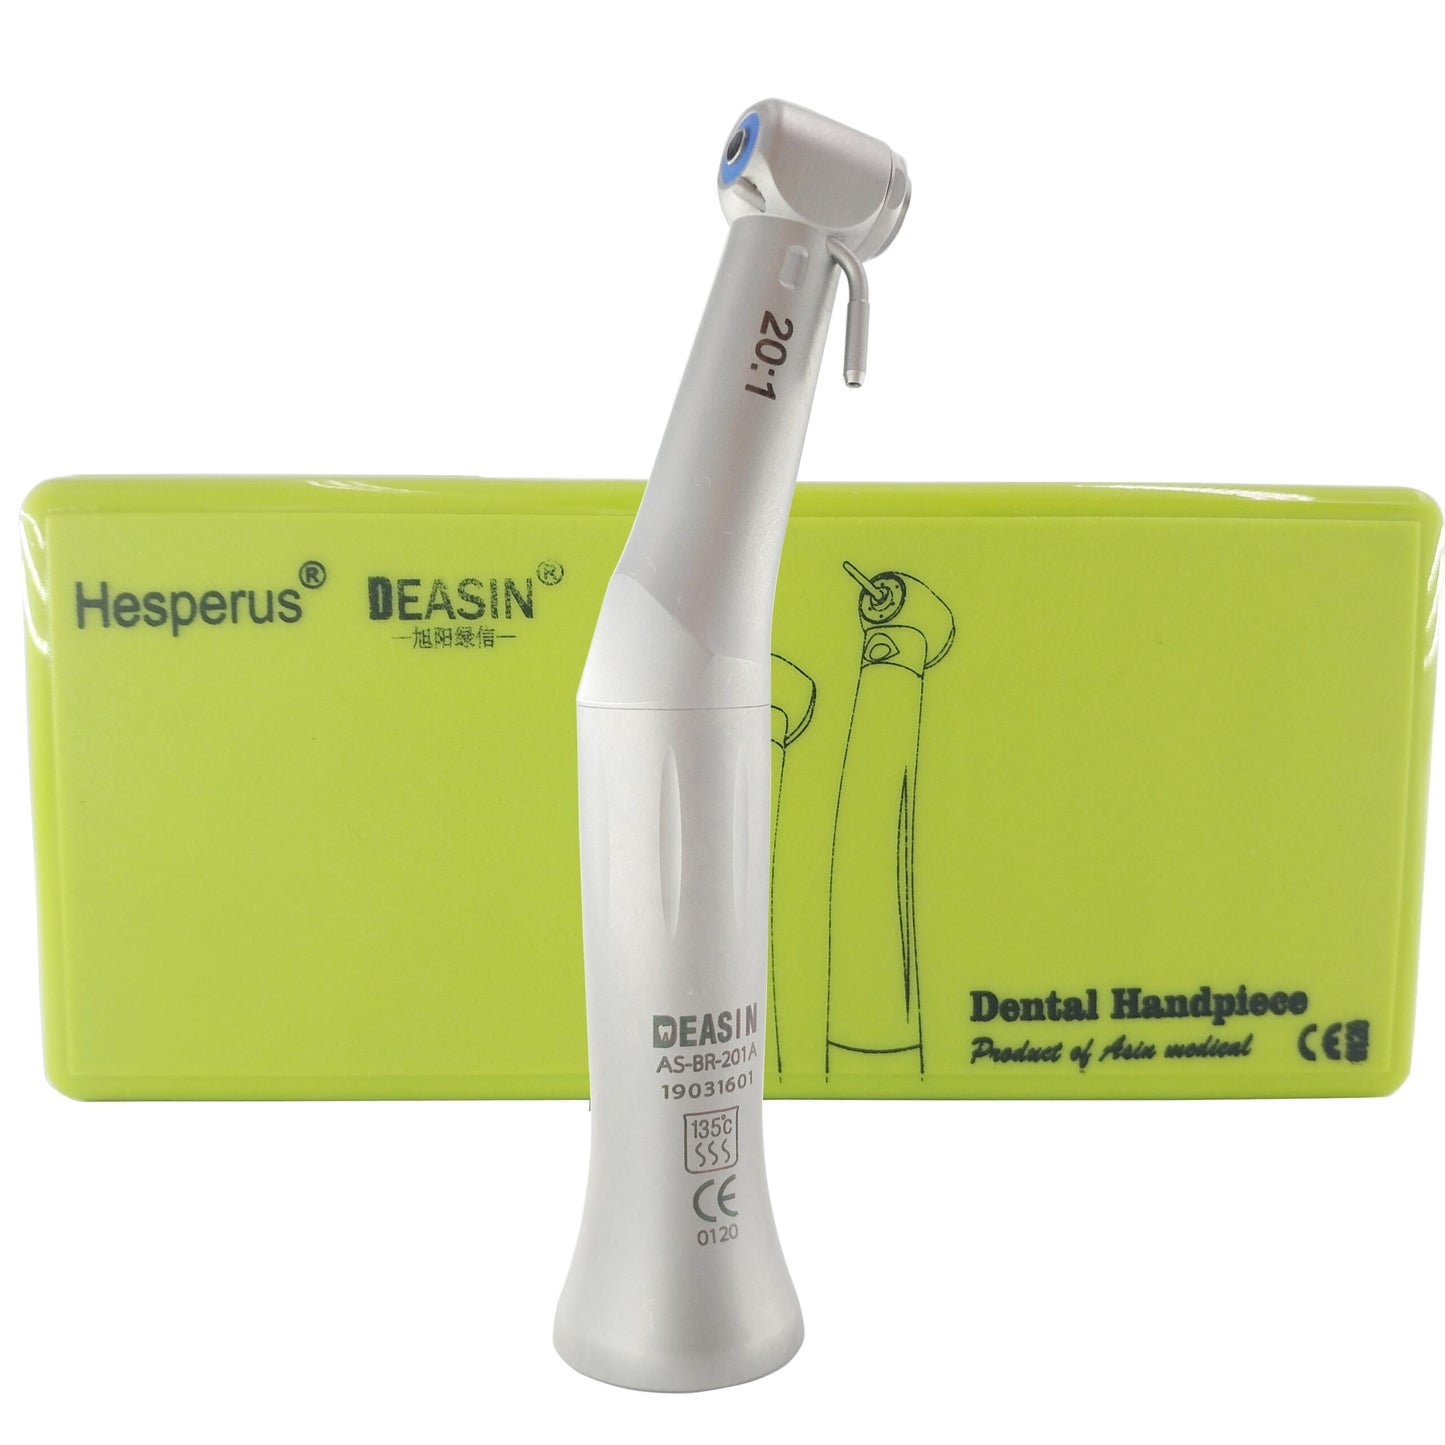 Dental implant handpiece 20:1 low speed contra angle green ring reduction without fiber optic E-type connect electric motor      2 - 9 Pieces     $52.00